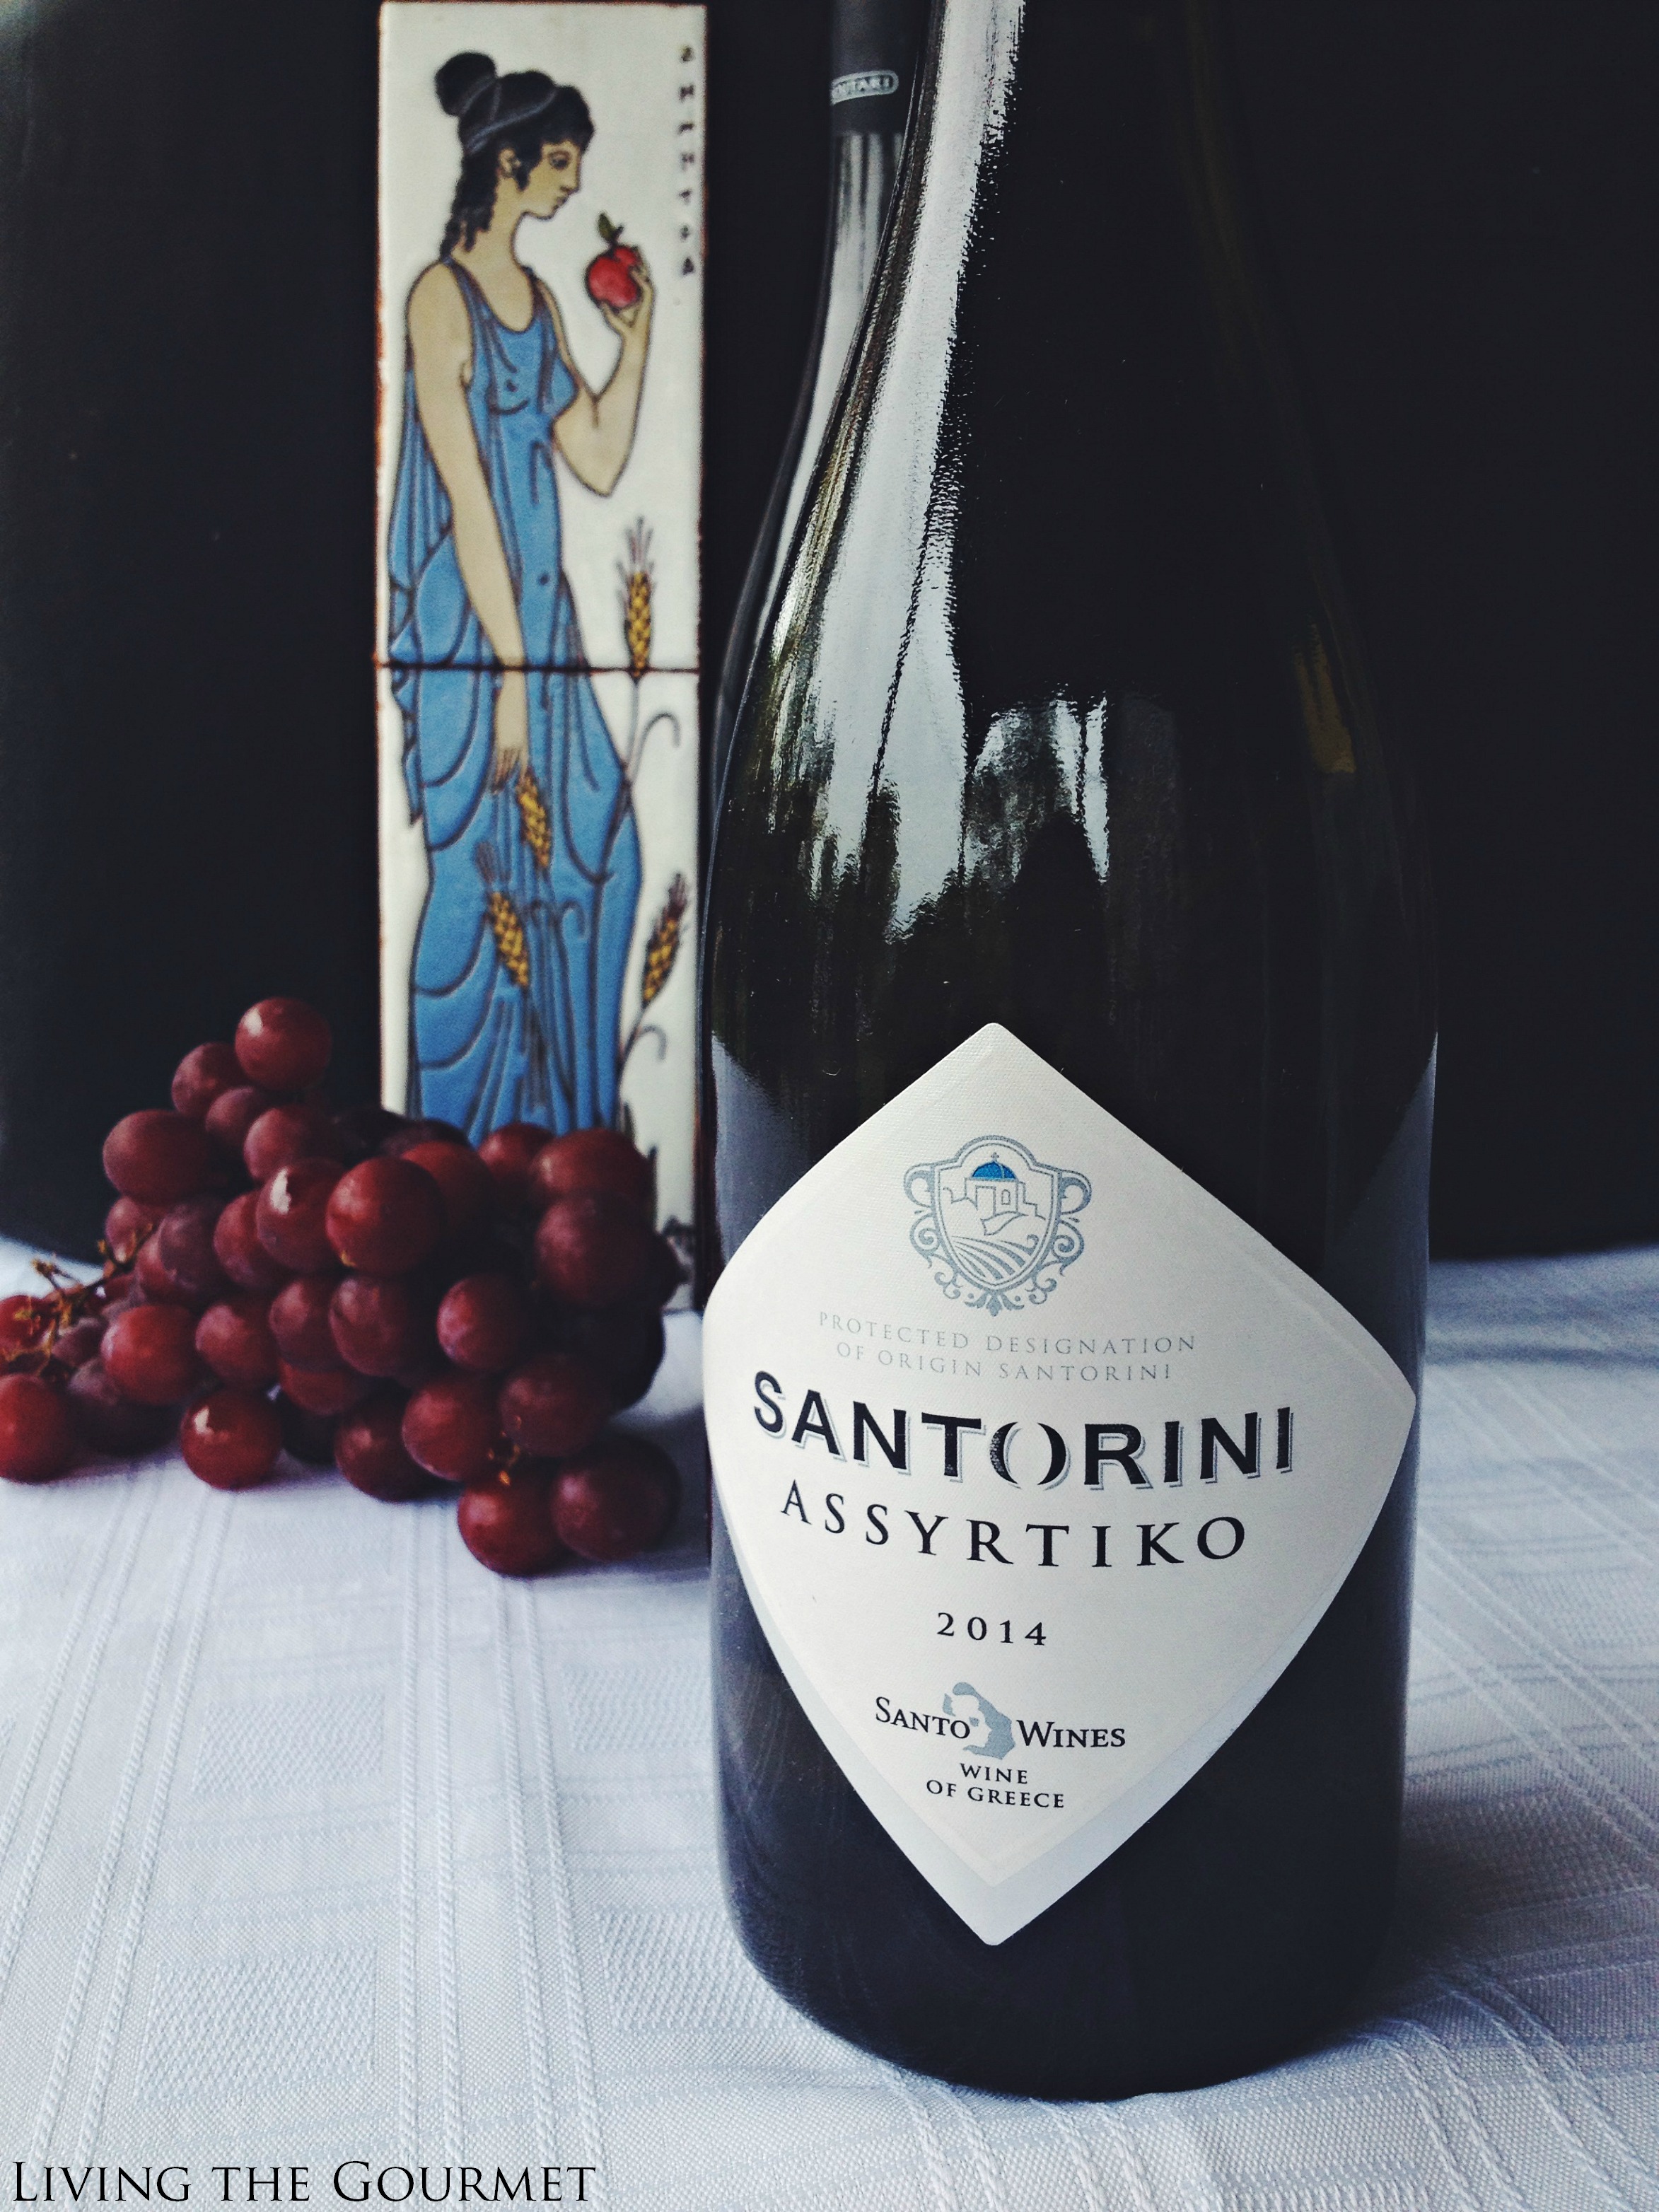 Living the Gourmet: The Wines of Santorini